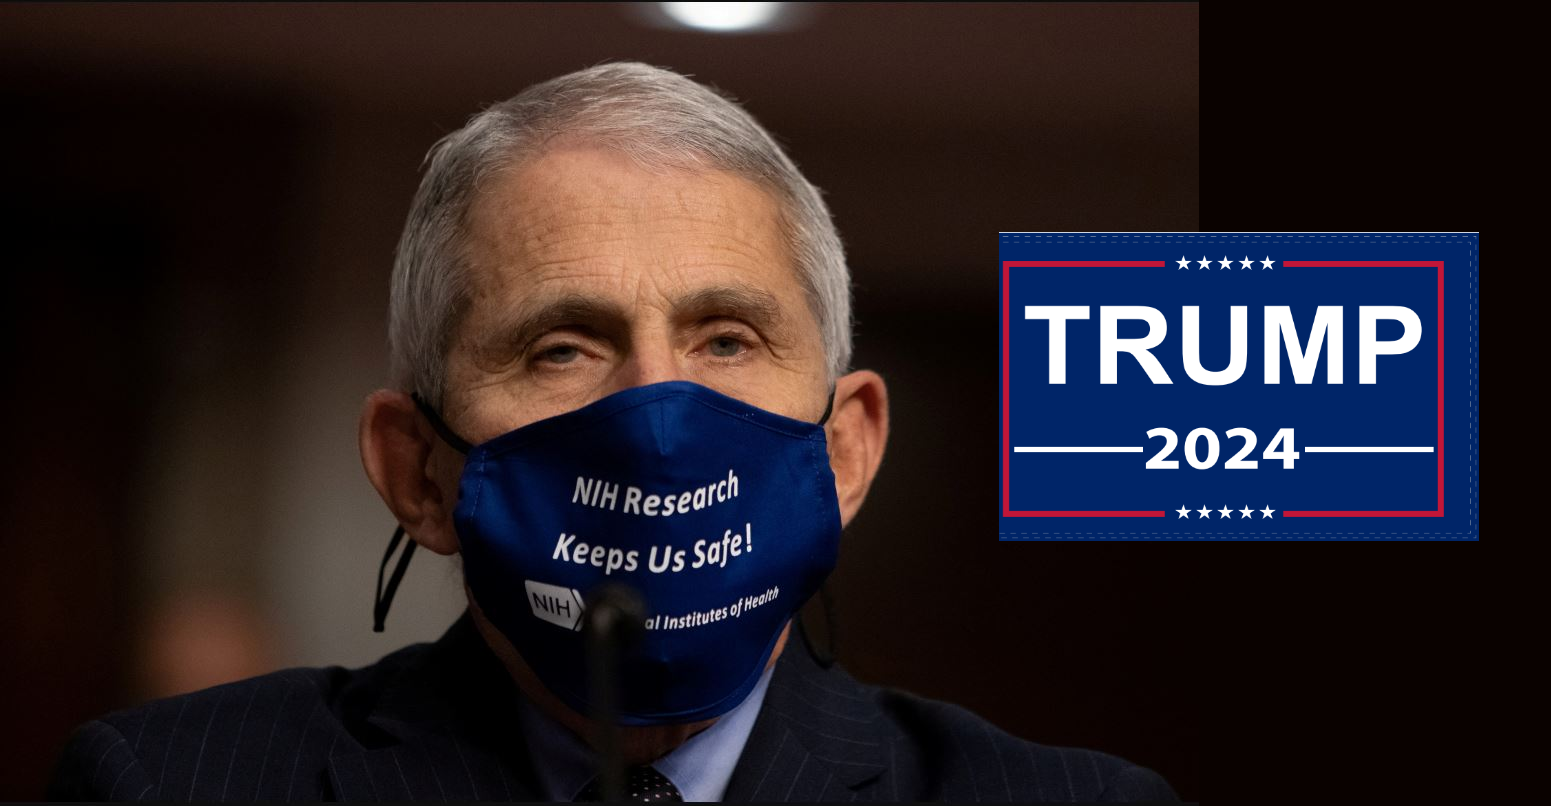 anthony fauci leaving white house in 2024 if trump is re-elected